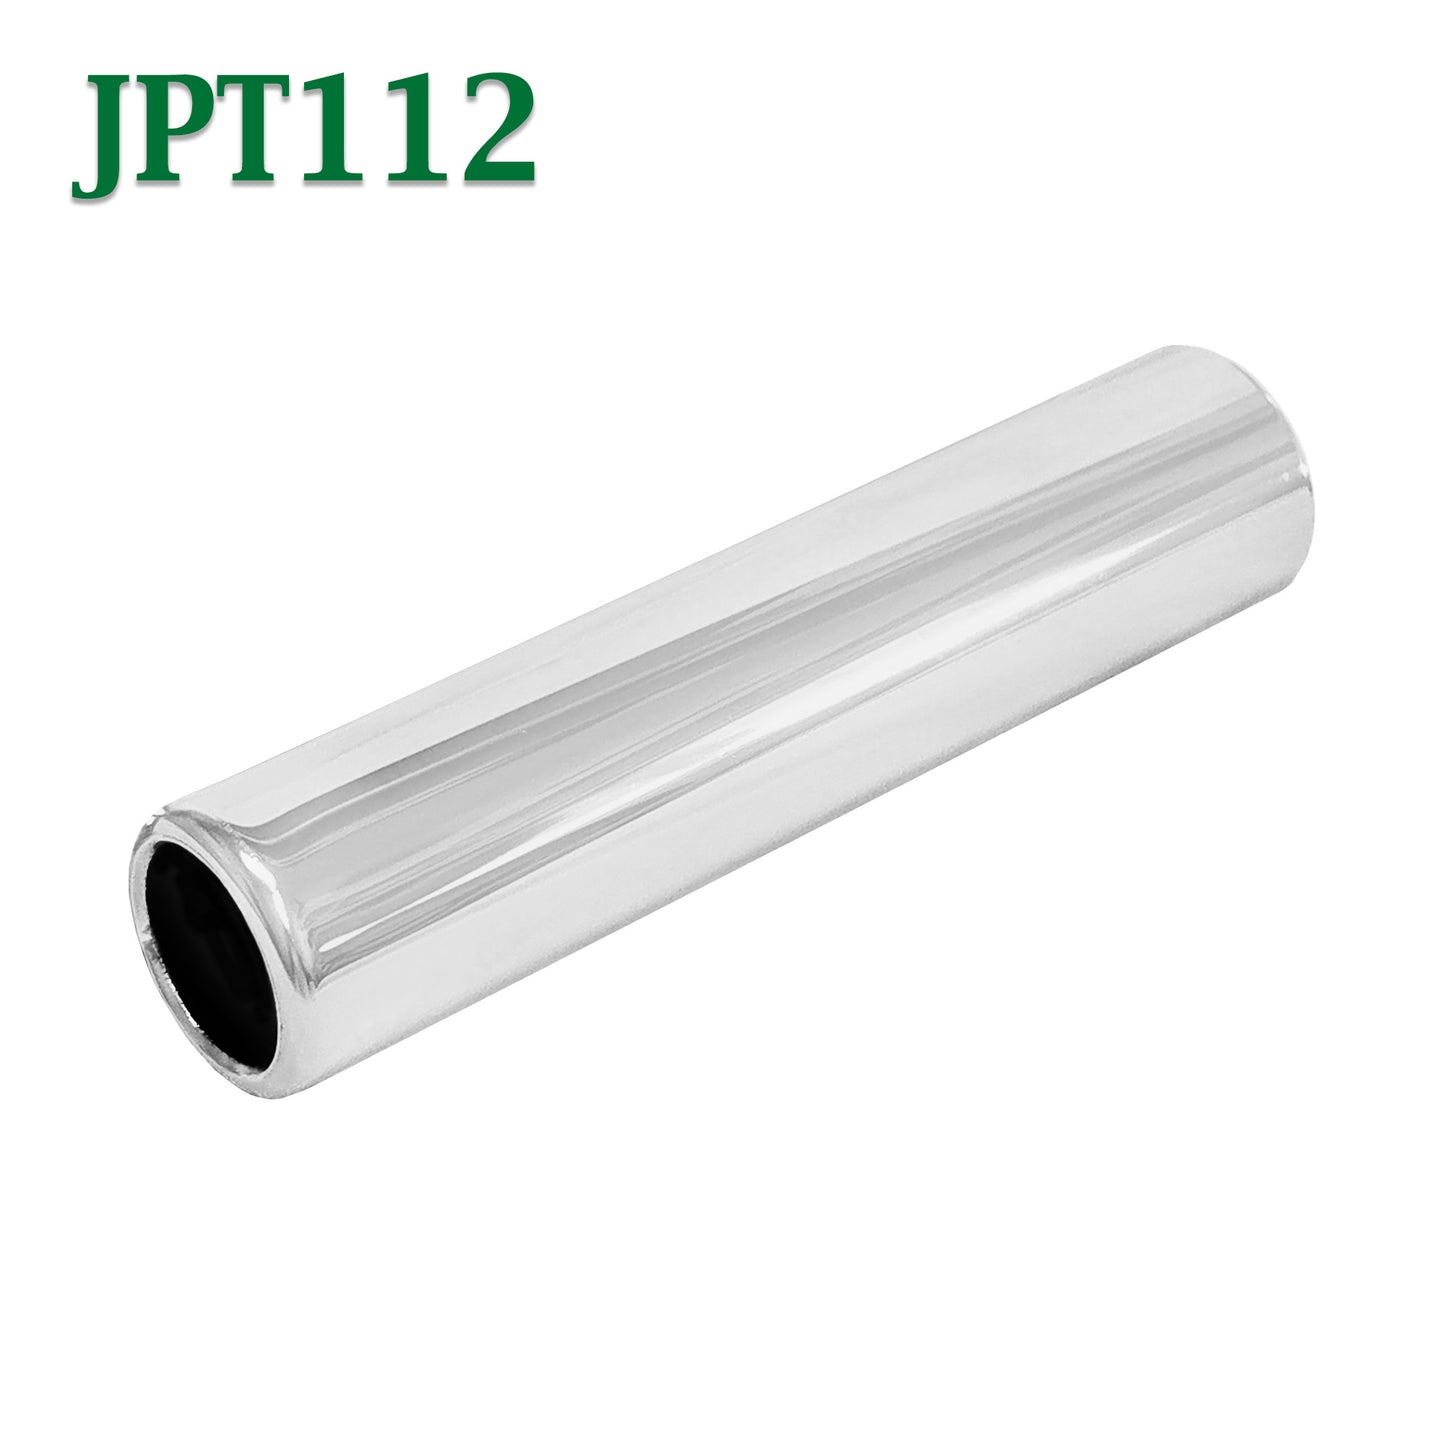 JPT112 1.5" Chrome Round Pencil Exhaust Tip 1 1/2" Inlet / 1 3/4" Outlet 8" Long